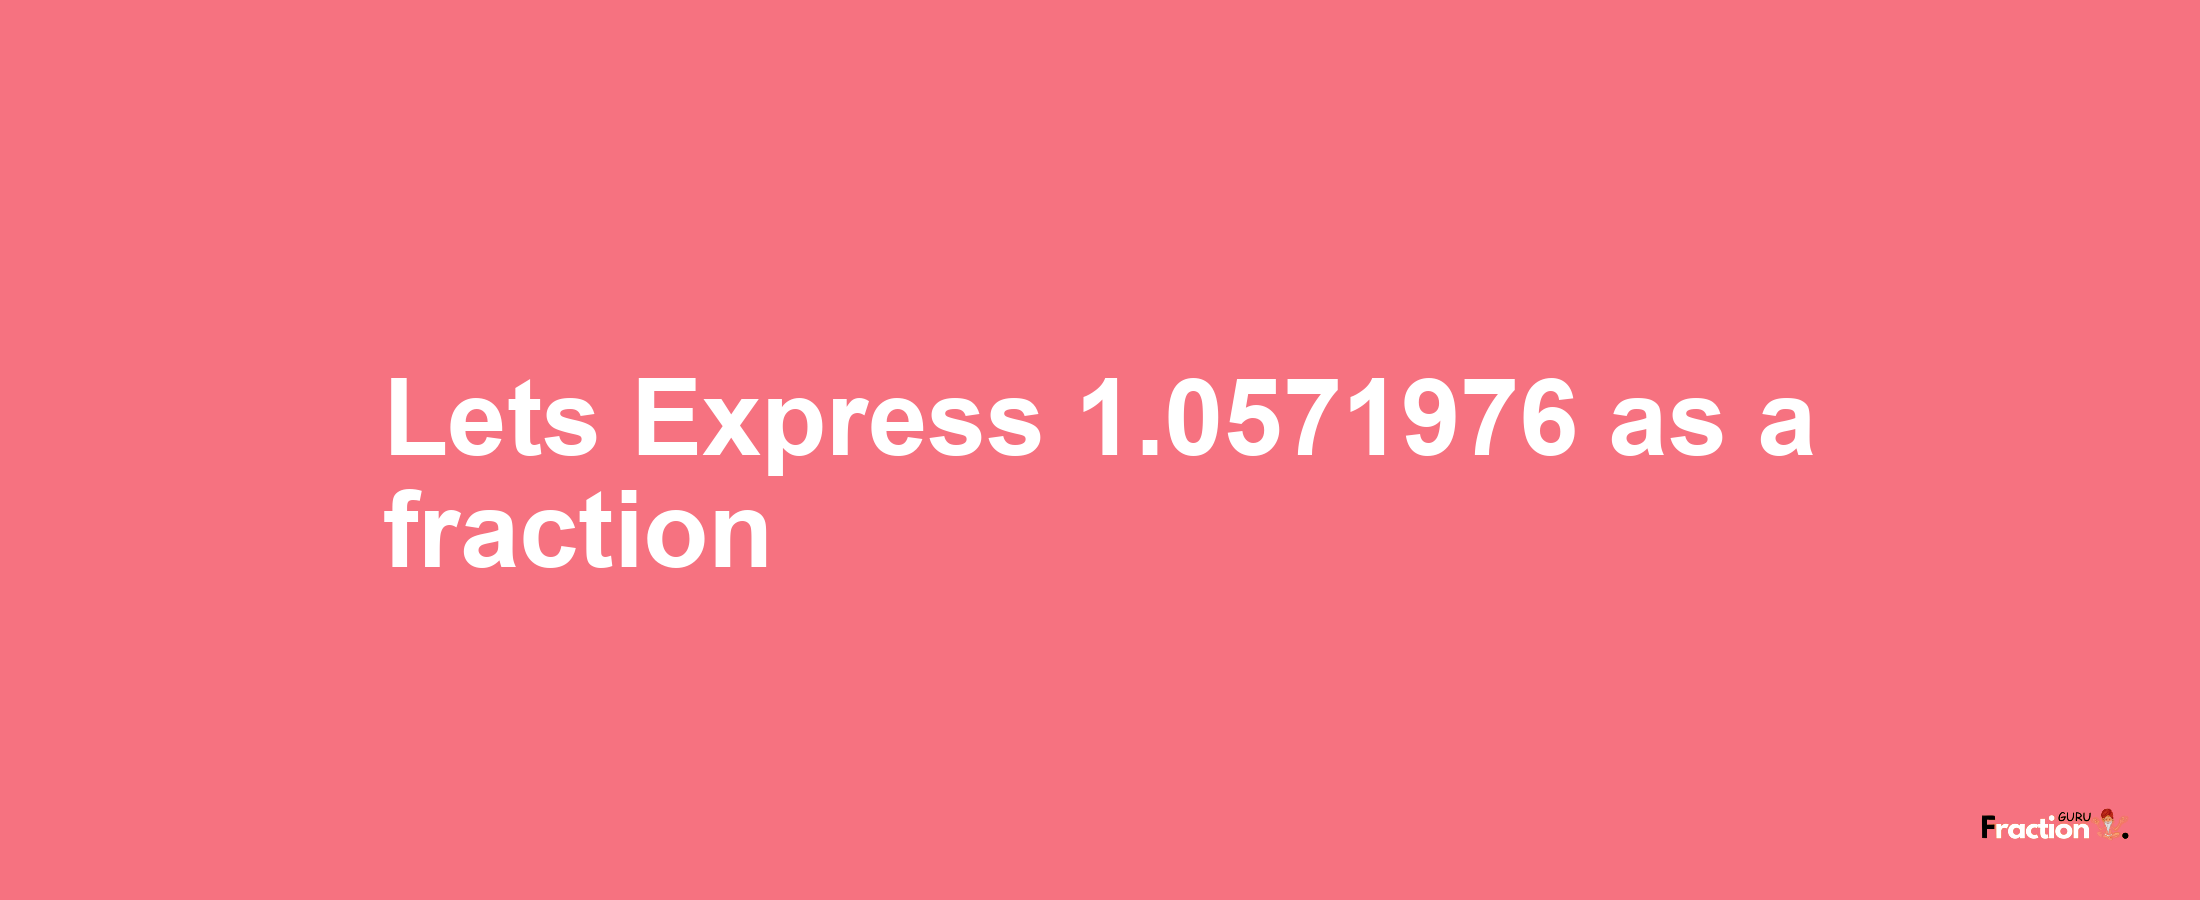 Lets Express 1.0571976 as afraction